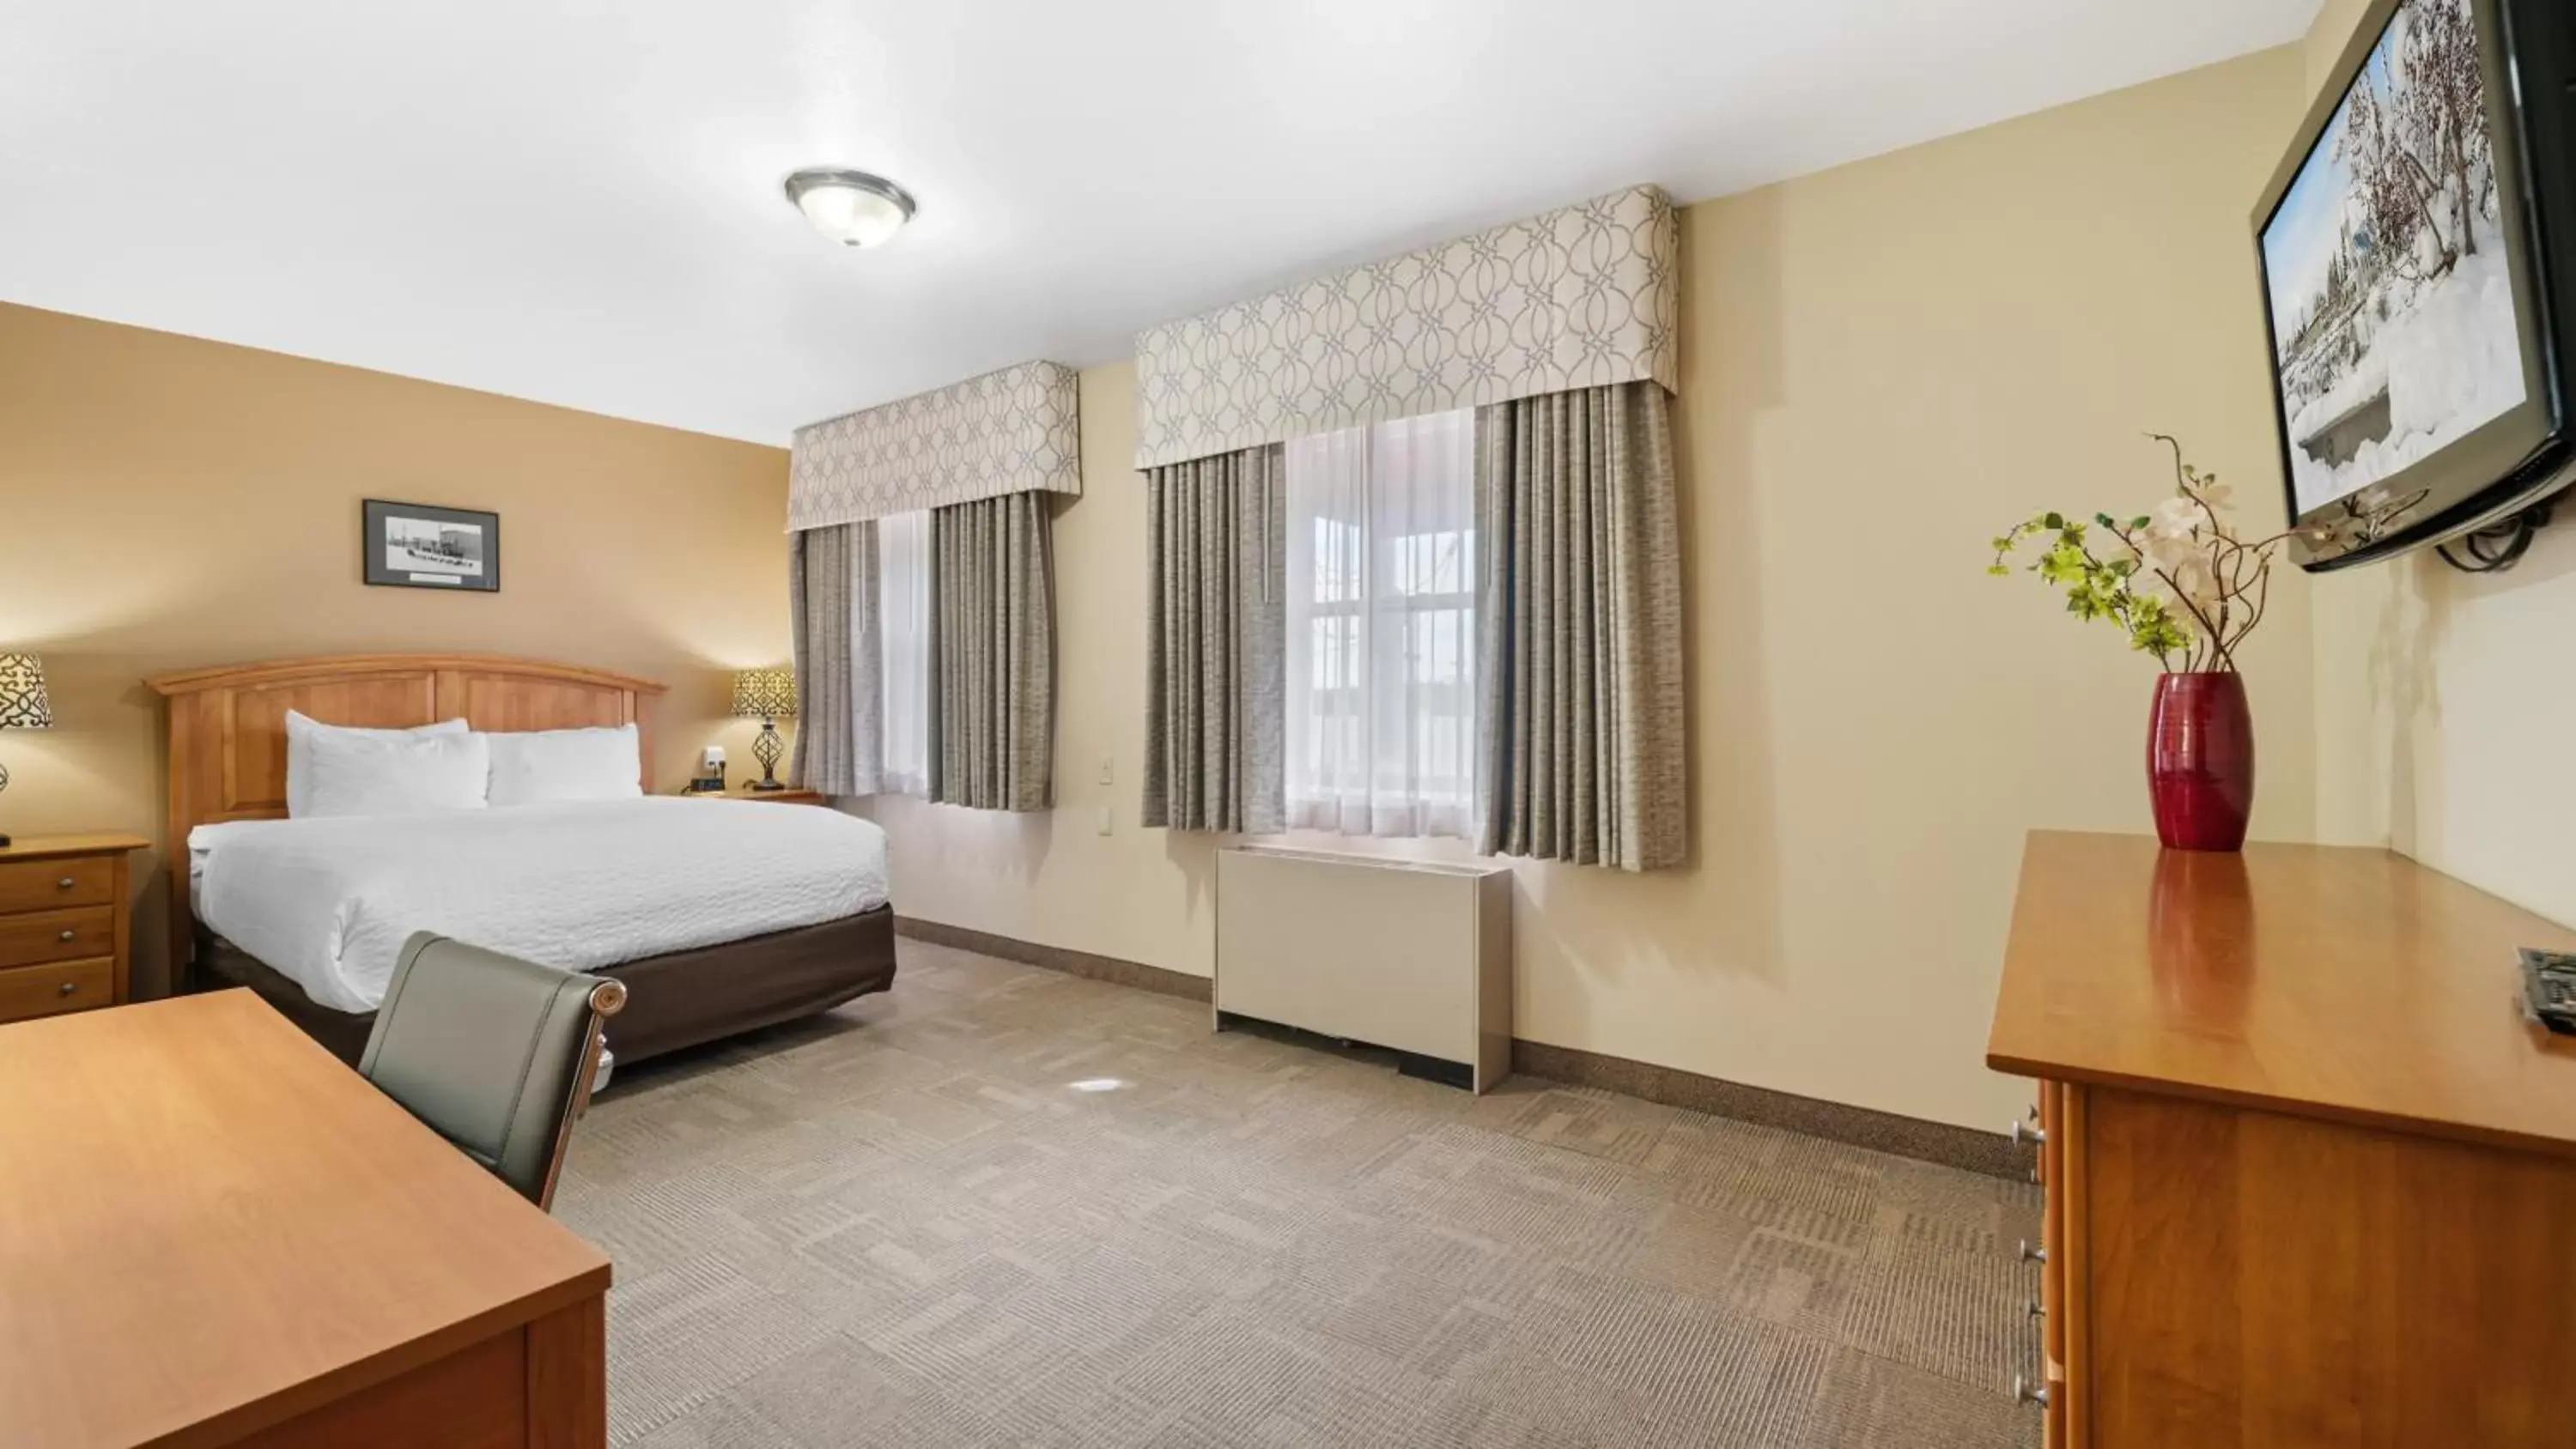 VIP in Clarion Hotel & Suites Fairbanks near Ft. Wainwright